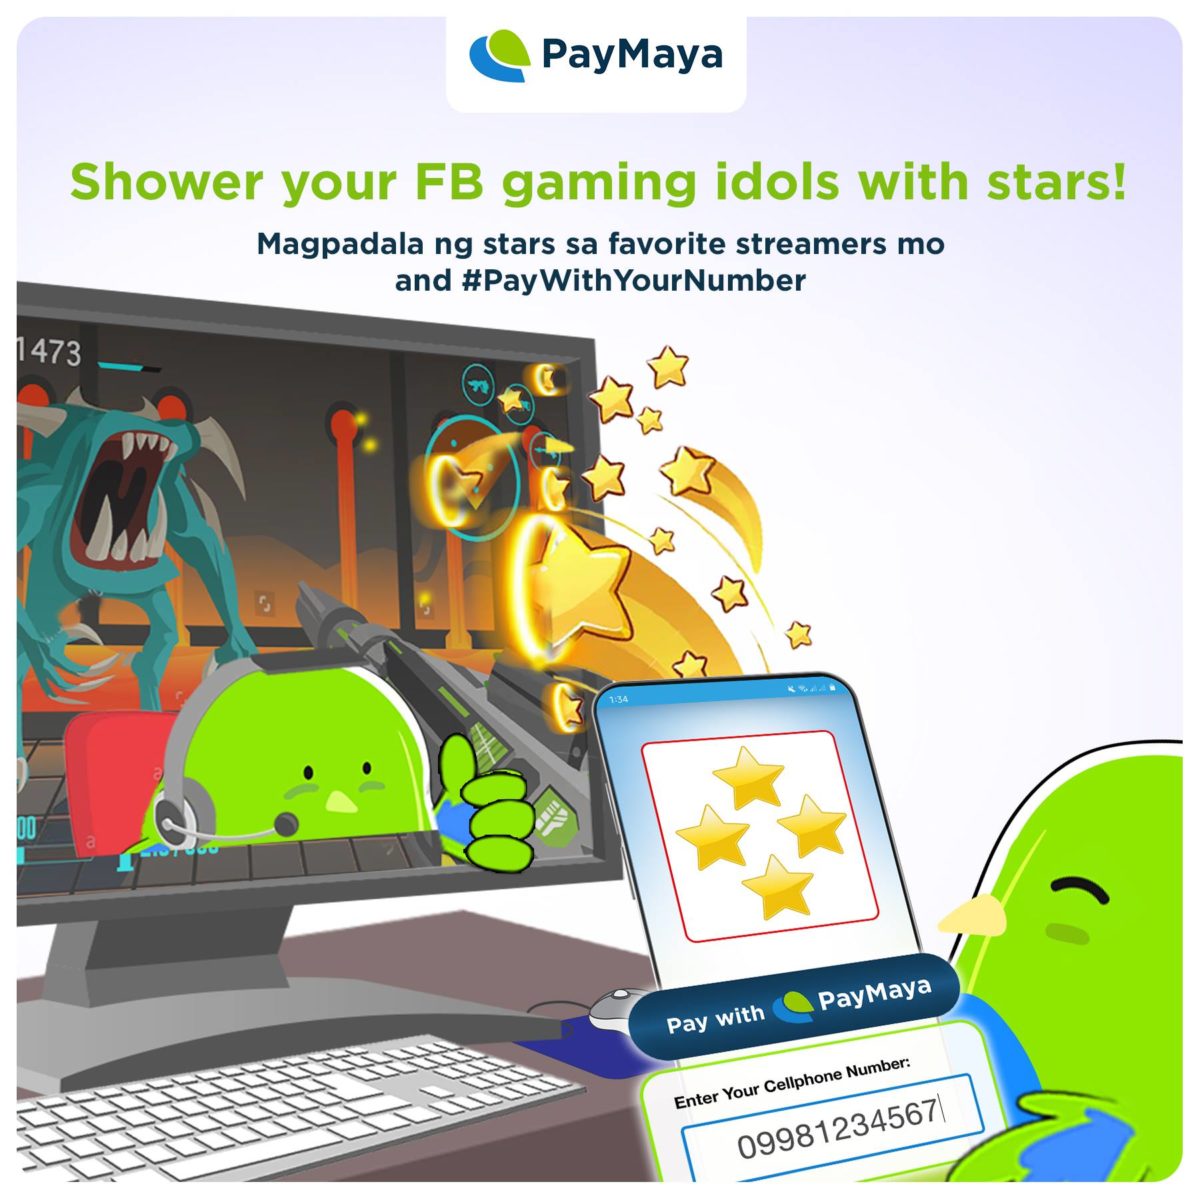 Support Your Favorite Streamers With Stars, Buy Directly With Paymaya